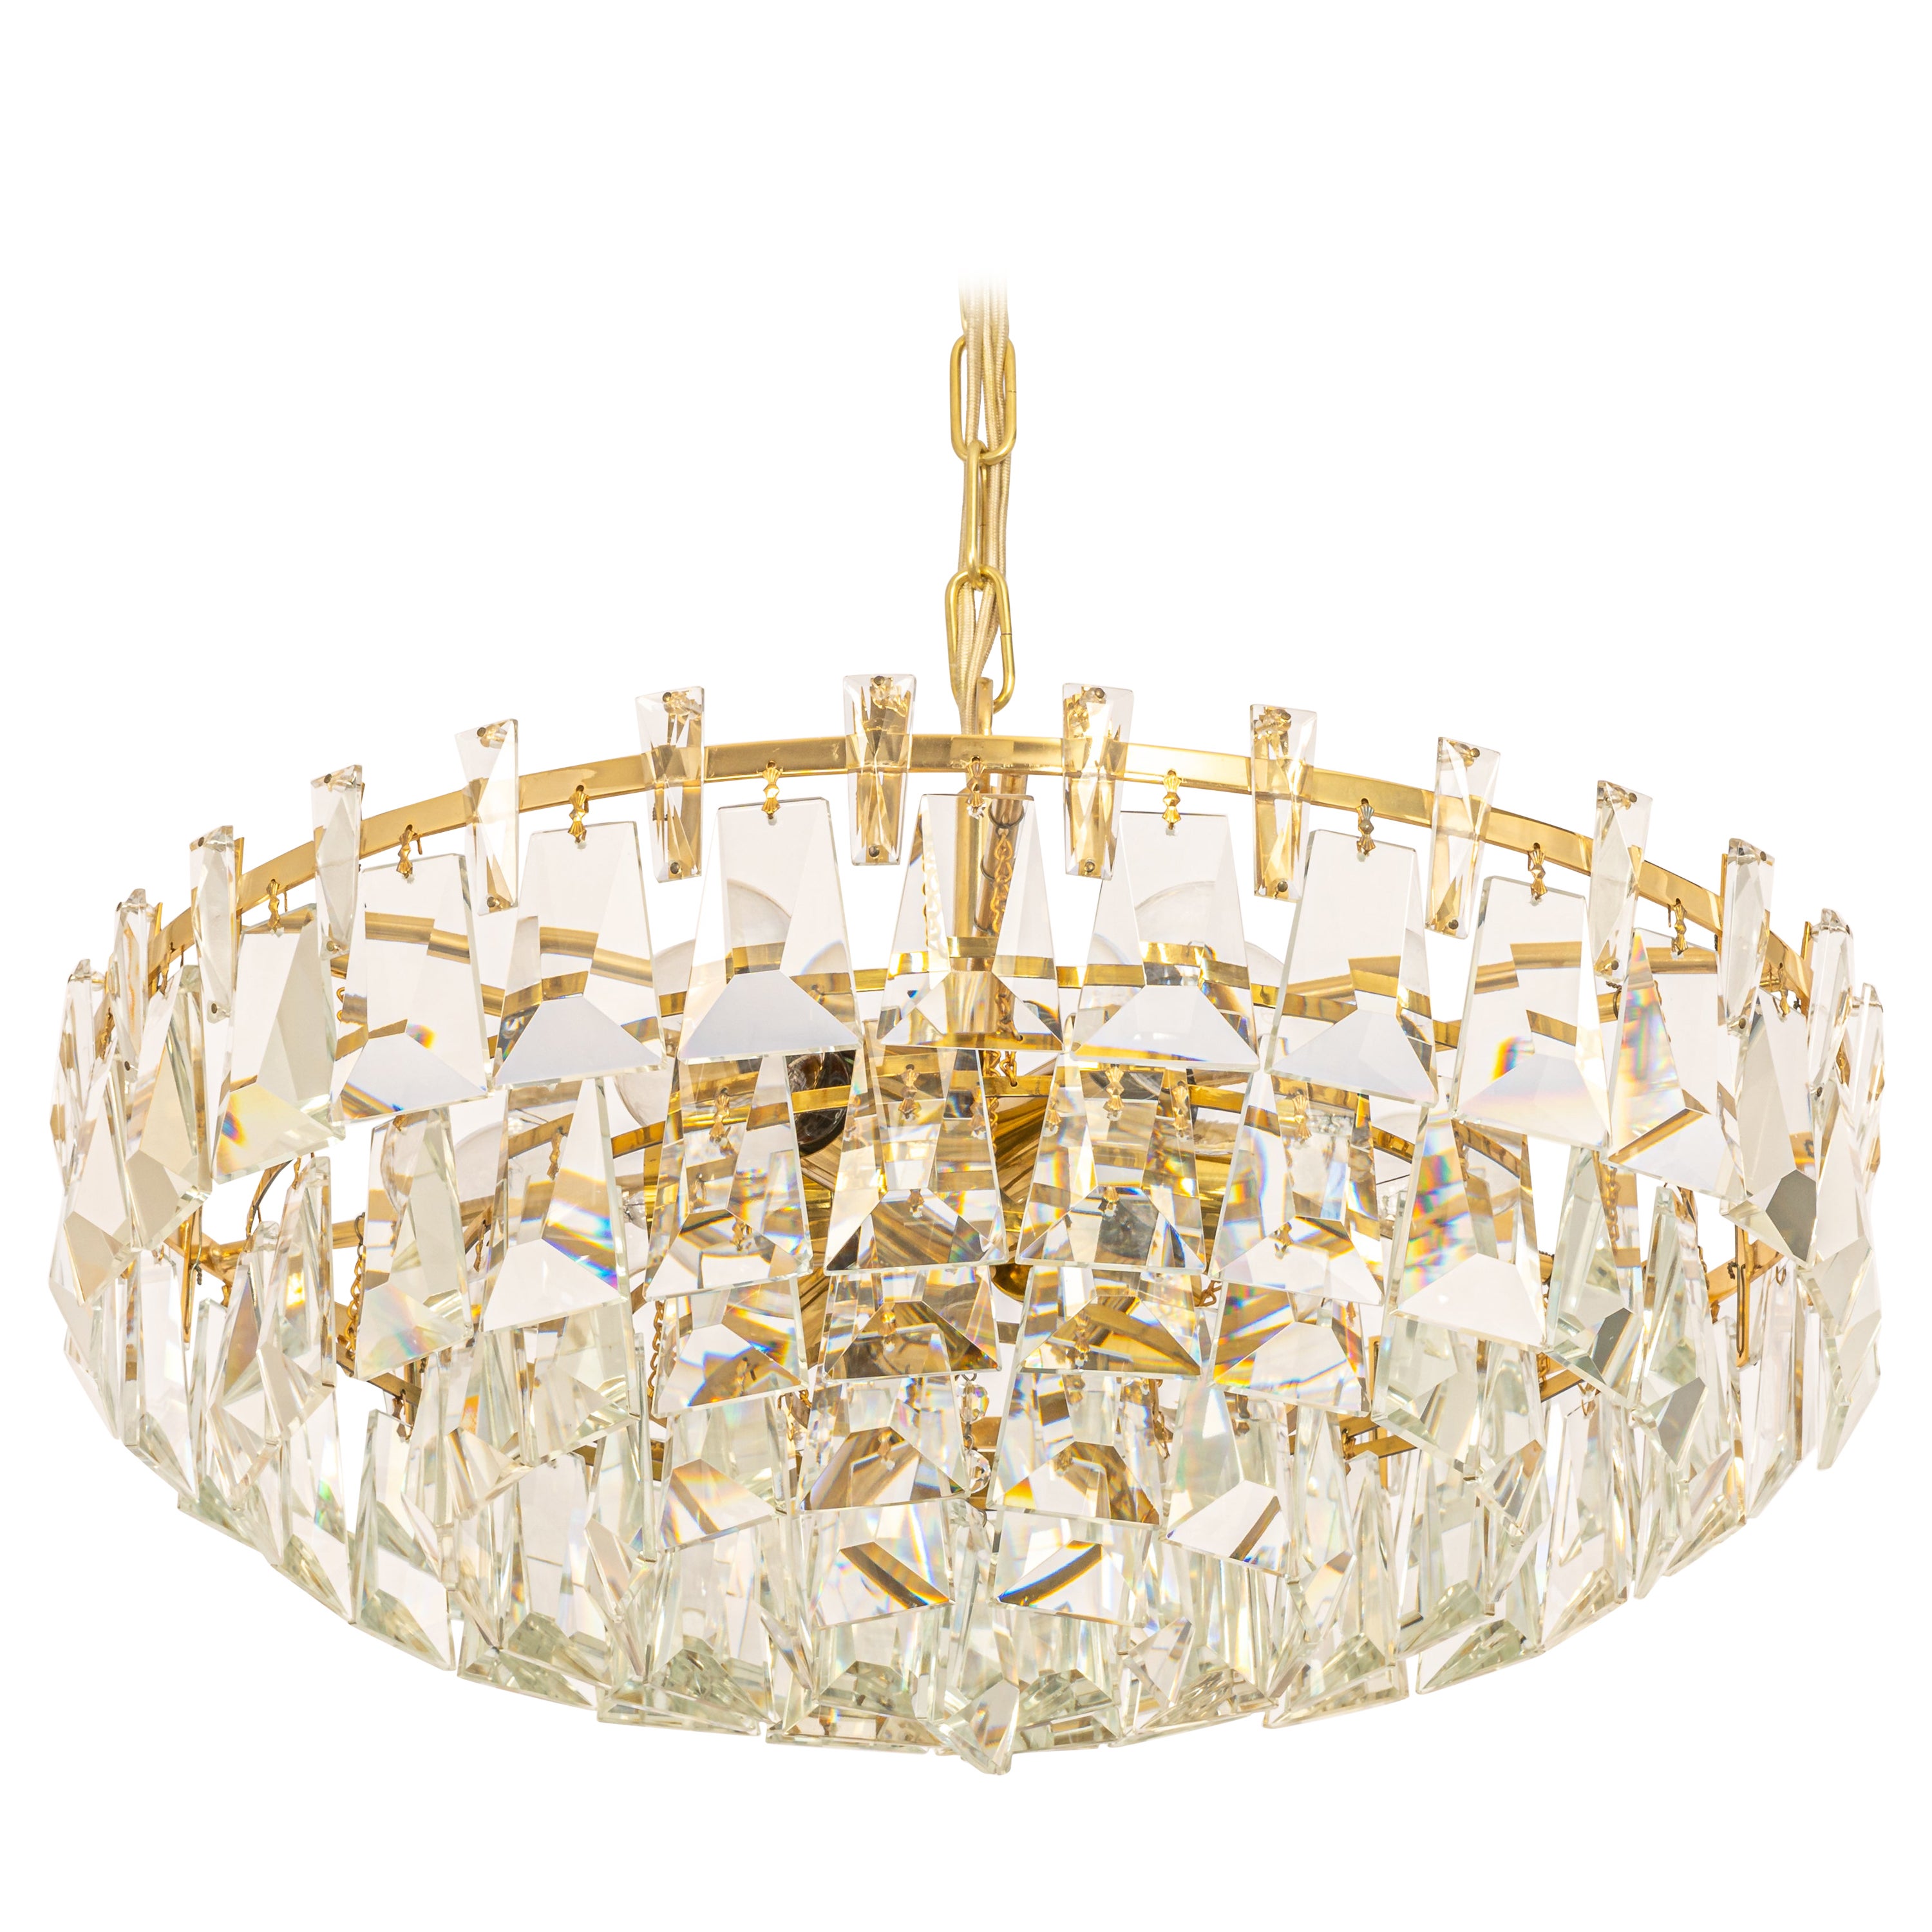 Large Gilt Brass and Crystal Chandelier, by Palwa, Germany, 1970s